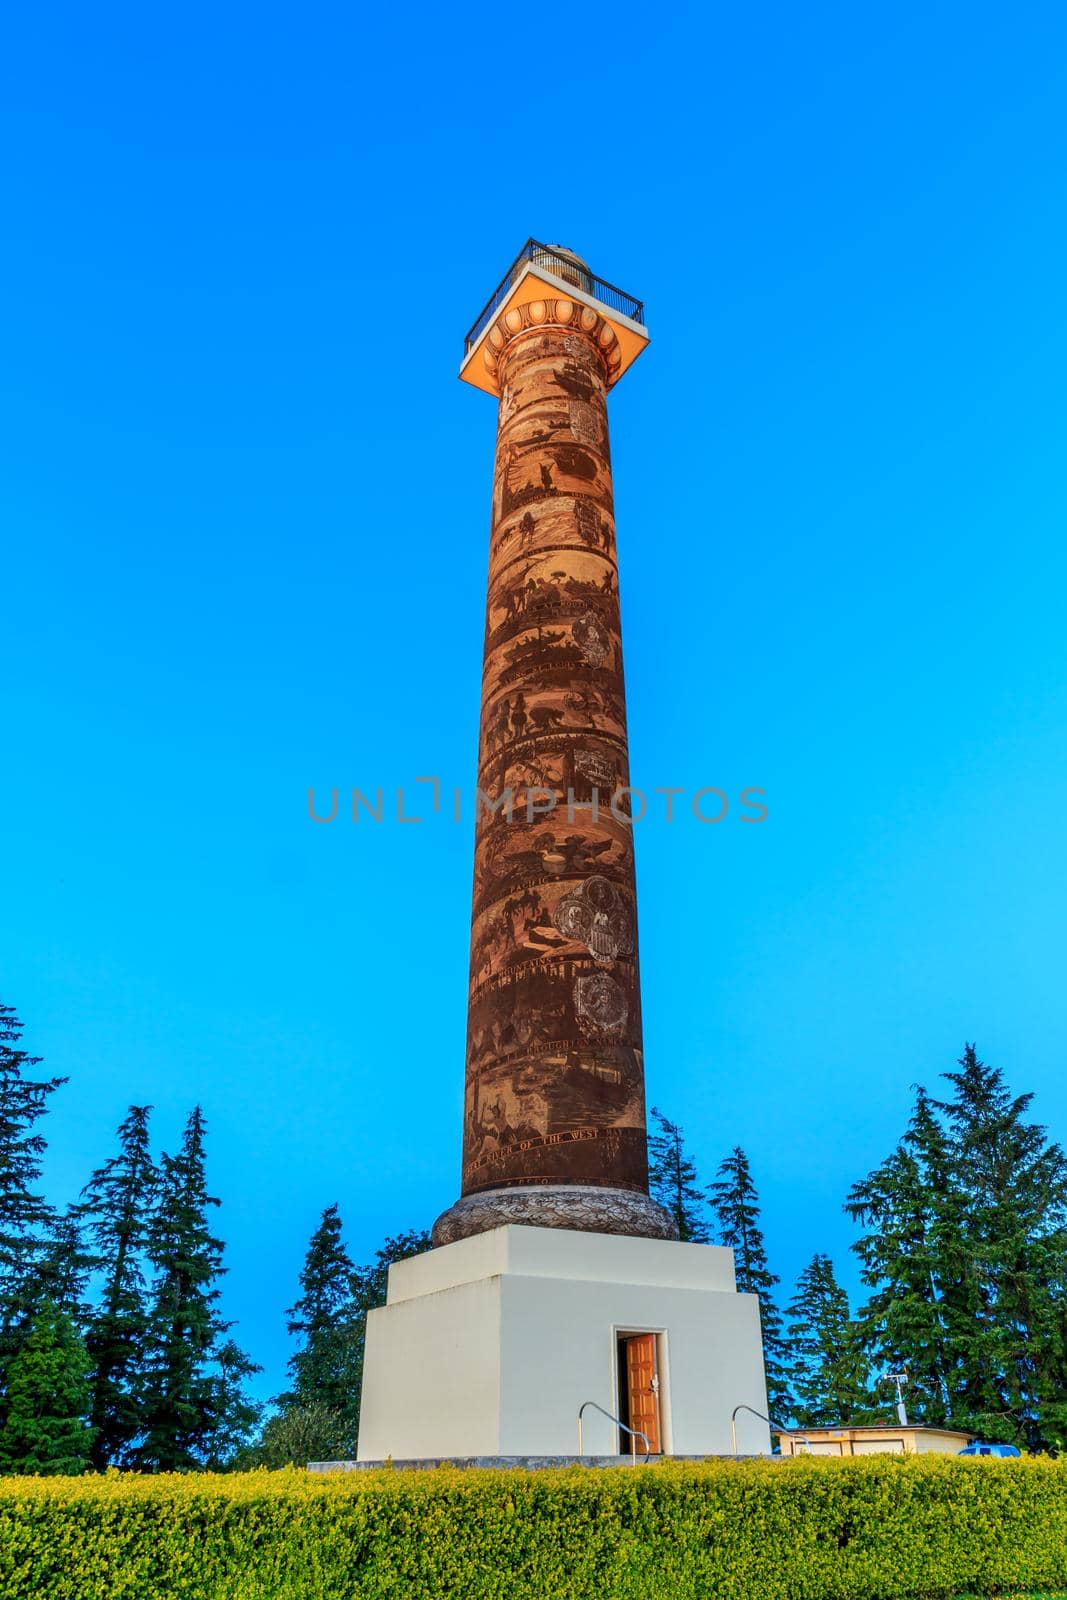 The Astoria Column is a tower overlooking the mouth of the Columbia River on Coxcomb Hill in the city of Astoria.